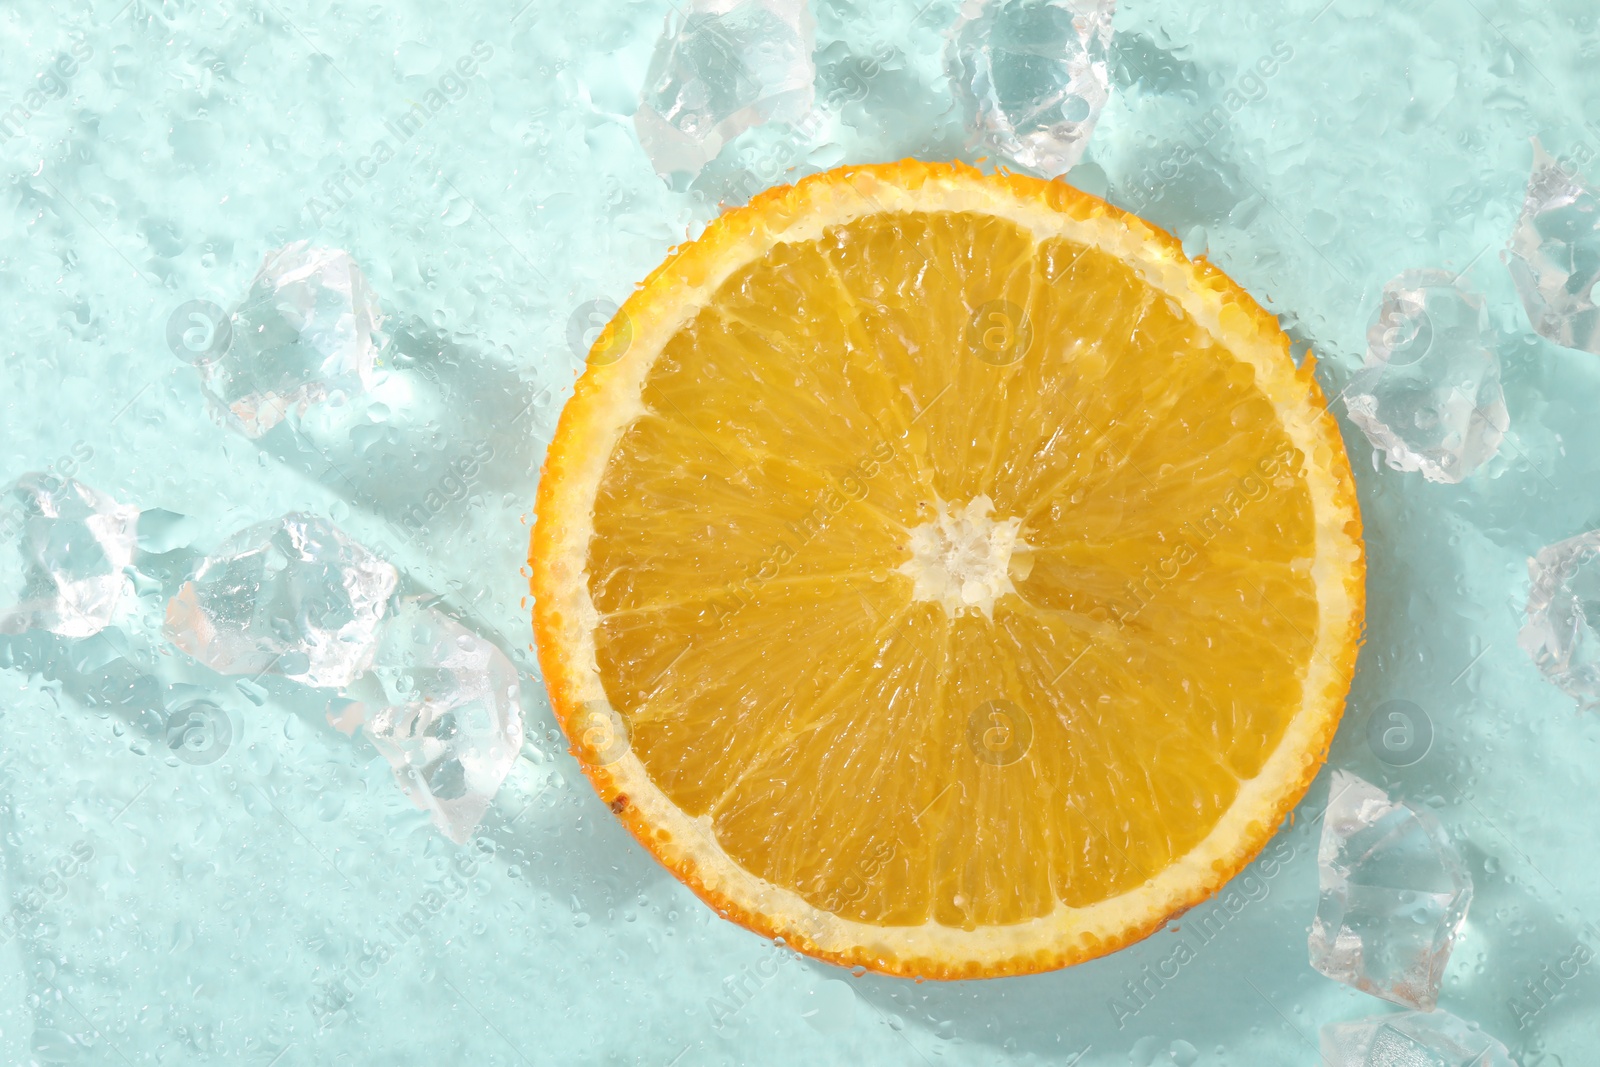 Photo of Slice of juicy orange and ice cubes on light blue background, top view